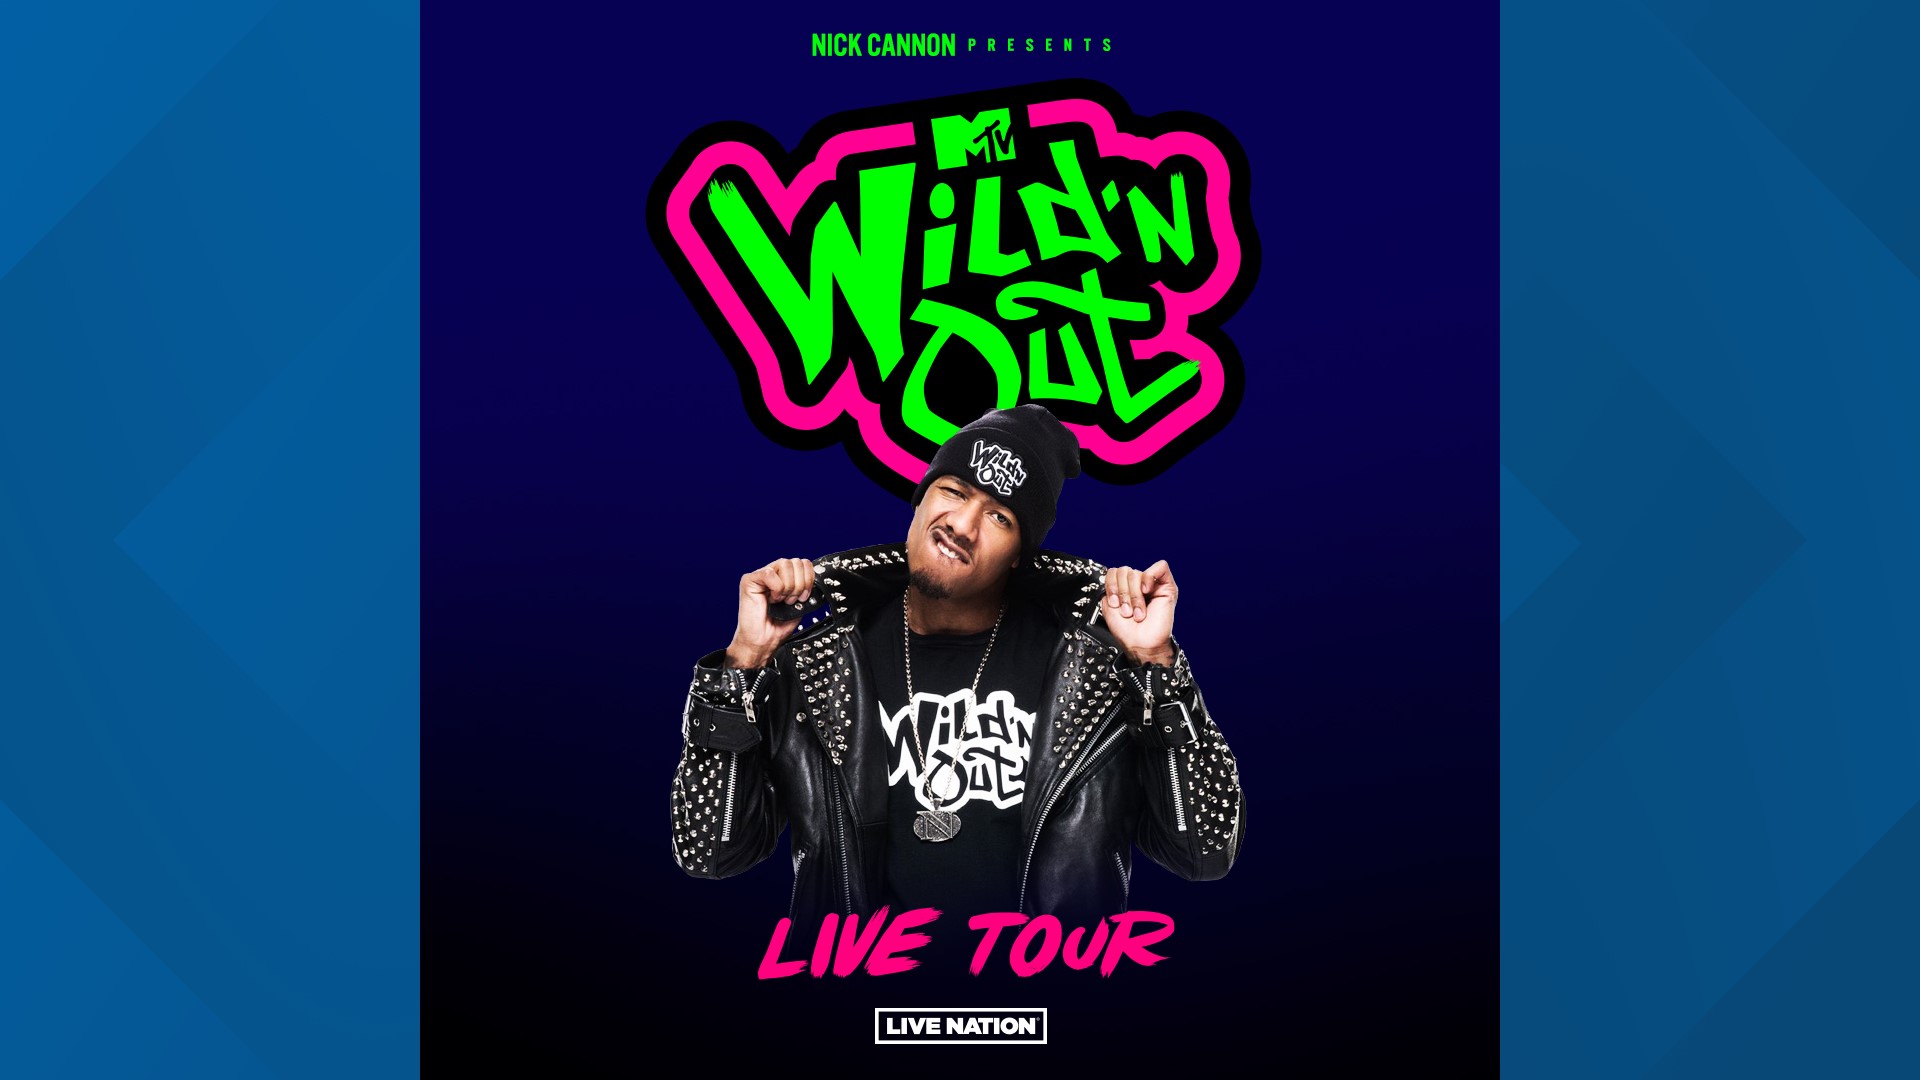 How to see Wild'n out live in Northeast Ohio at Blossom Music